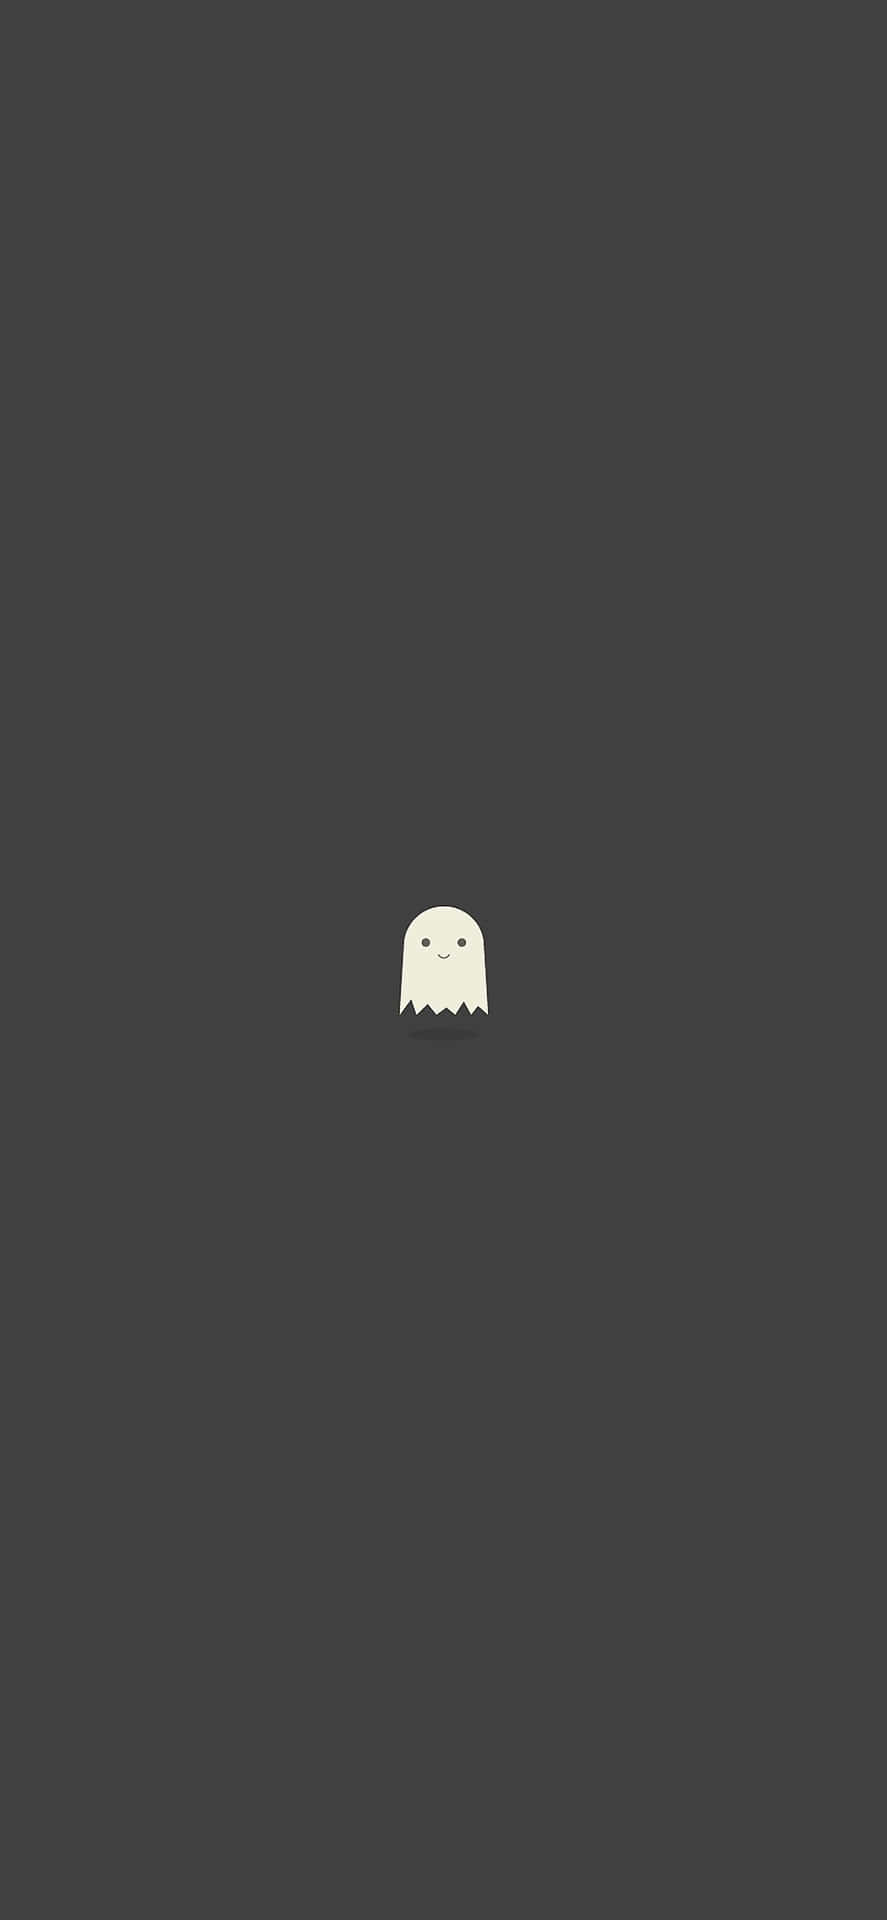 Get Ready For Halloween With This Fun And Cute Ghost! Wallpaper